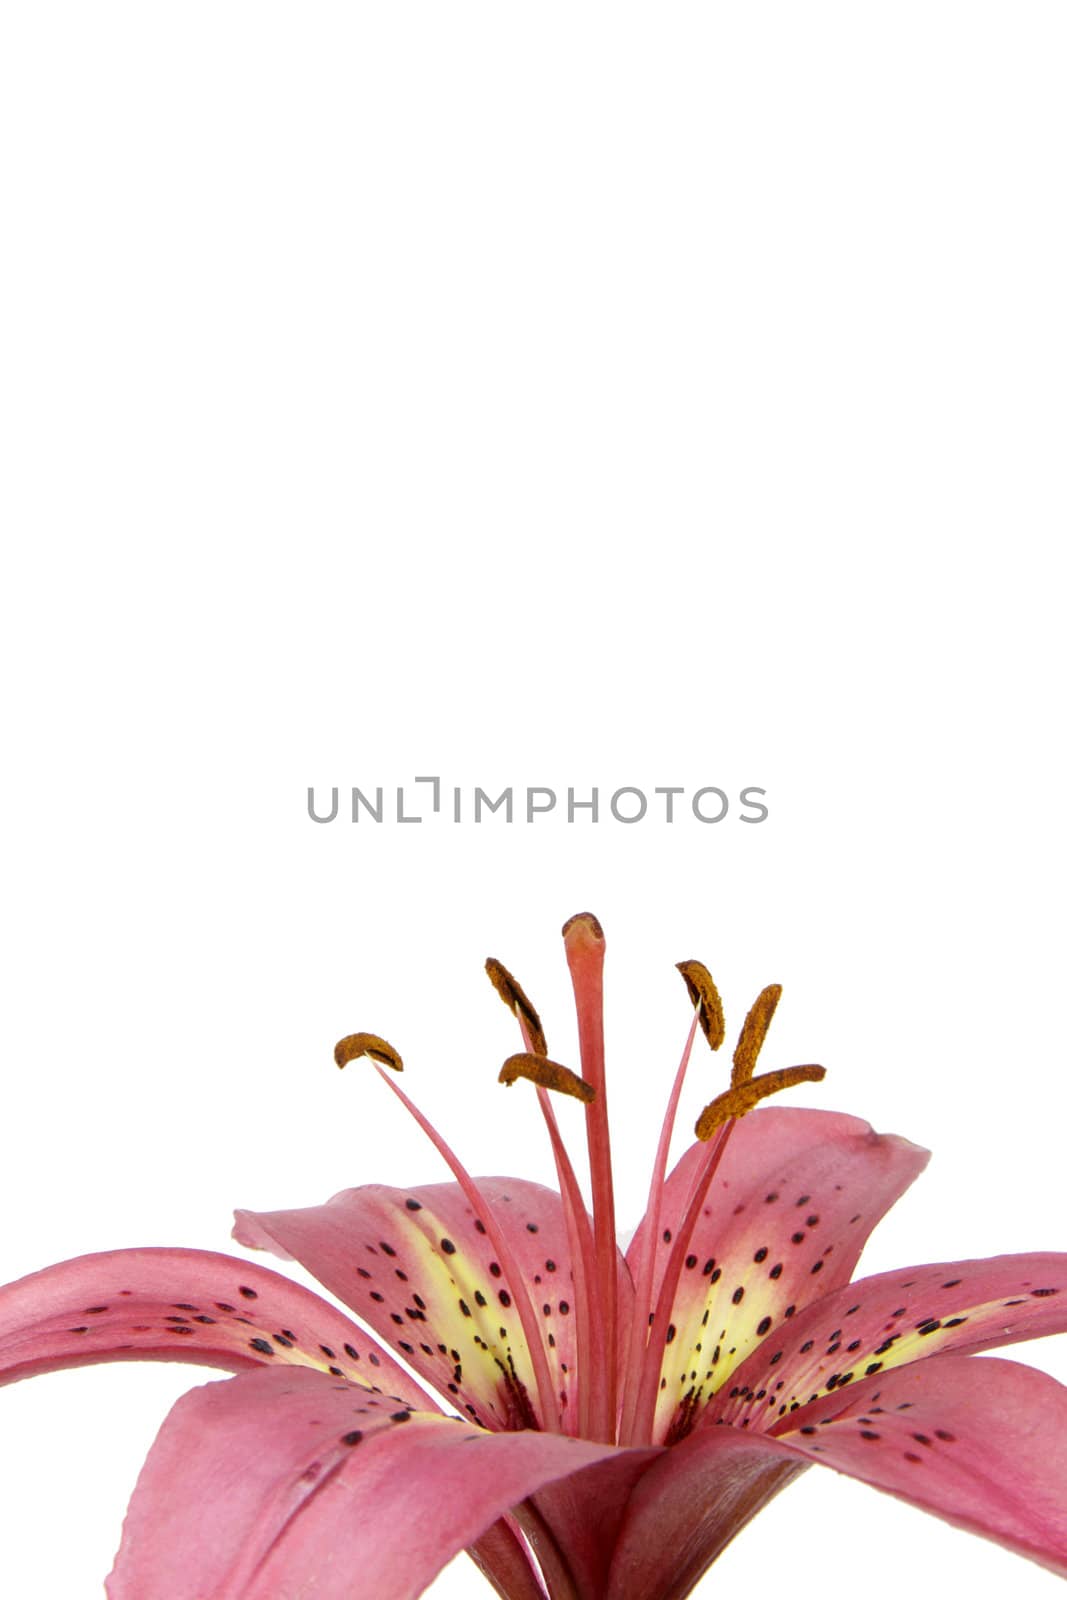 Pink Lily with Copyspace
 by ca2hill